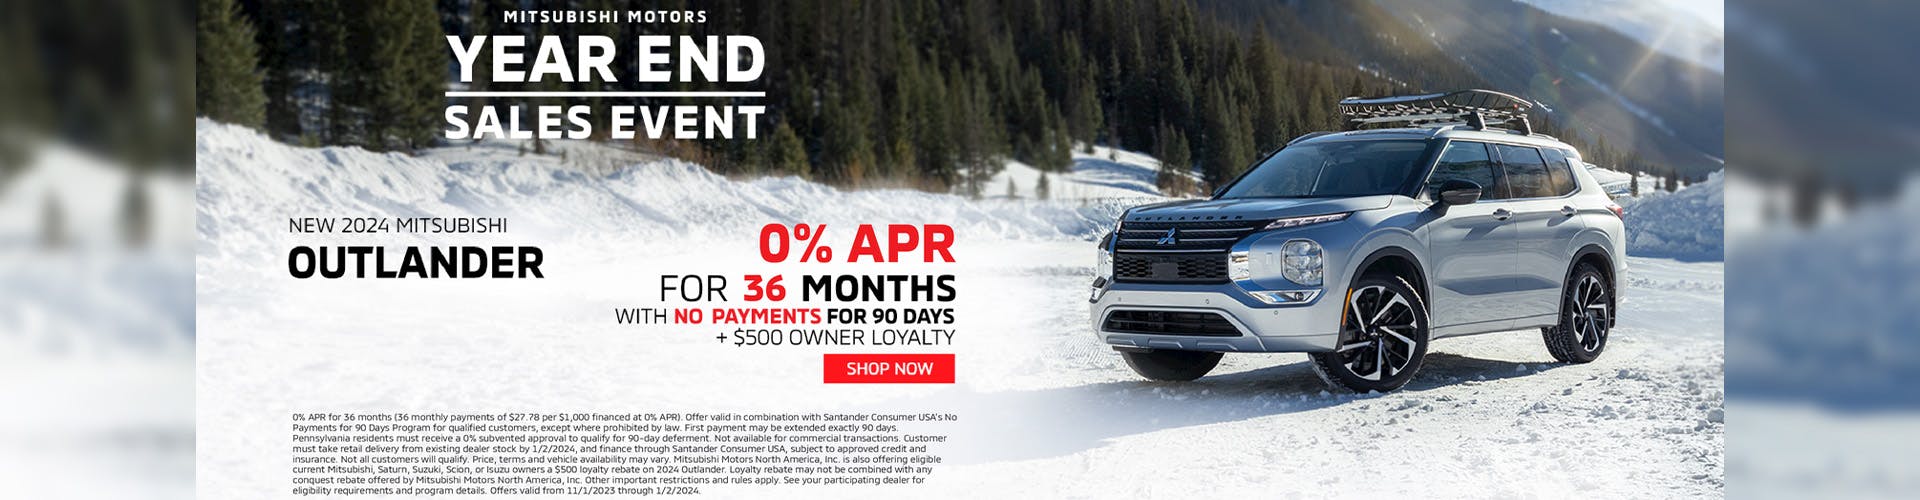 3 year end sales event